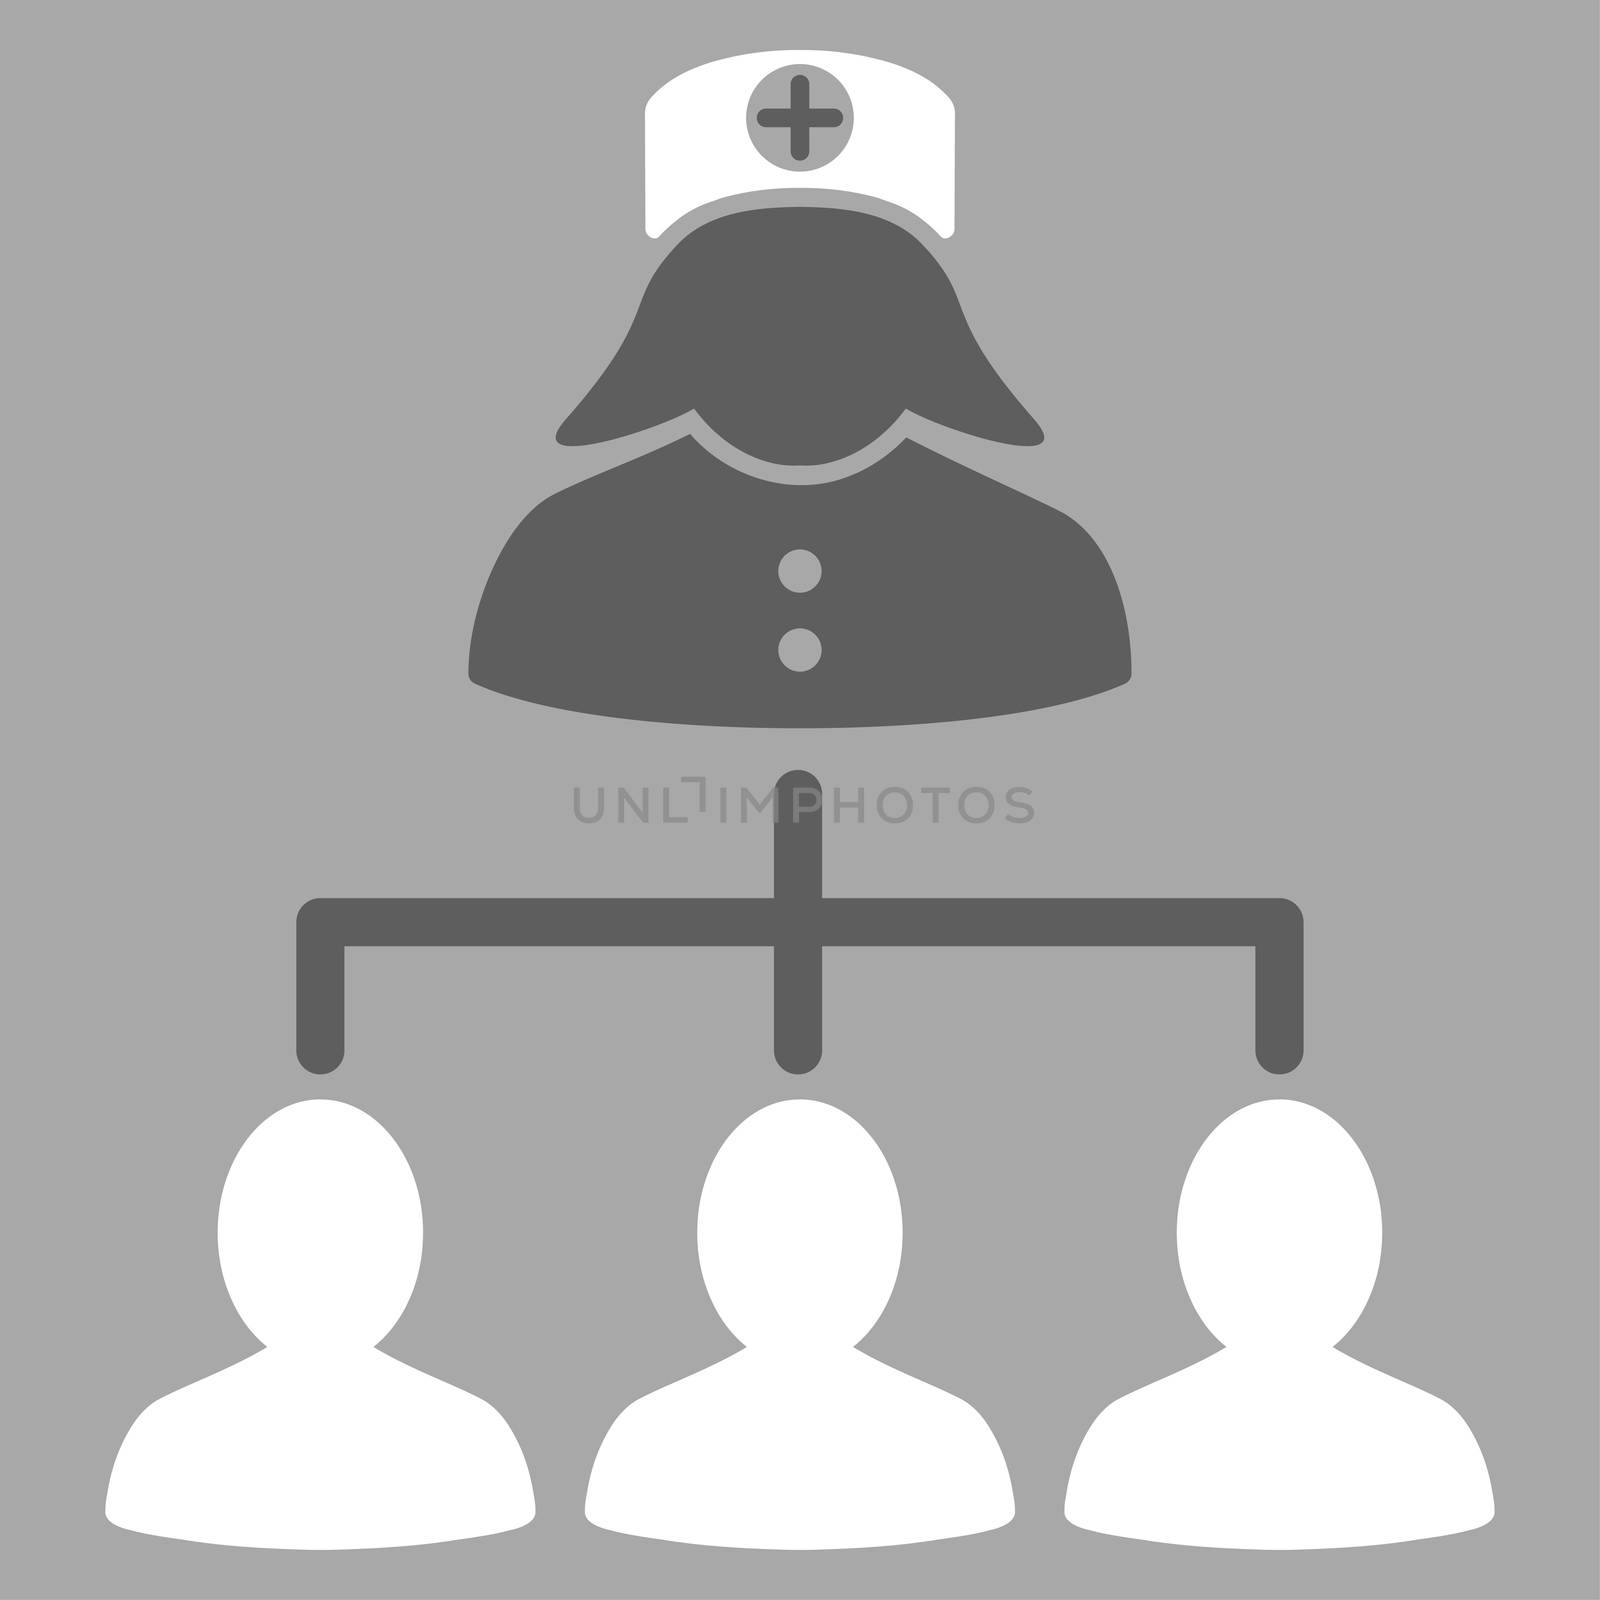 Nurse Patients raster icon. Style is bicolor flat symbol, dark gray and white colors, rounded angles, silver background.